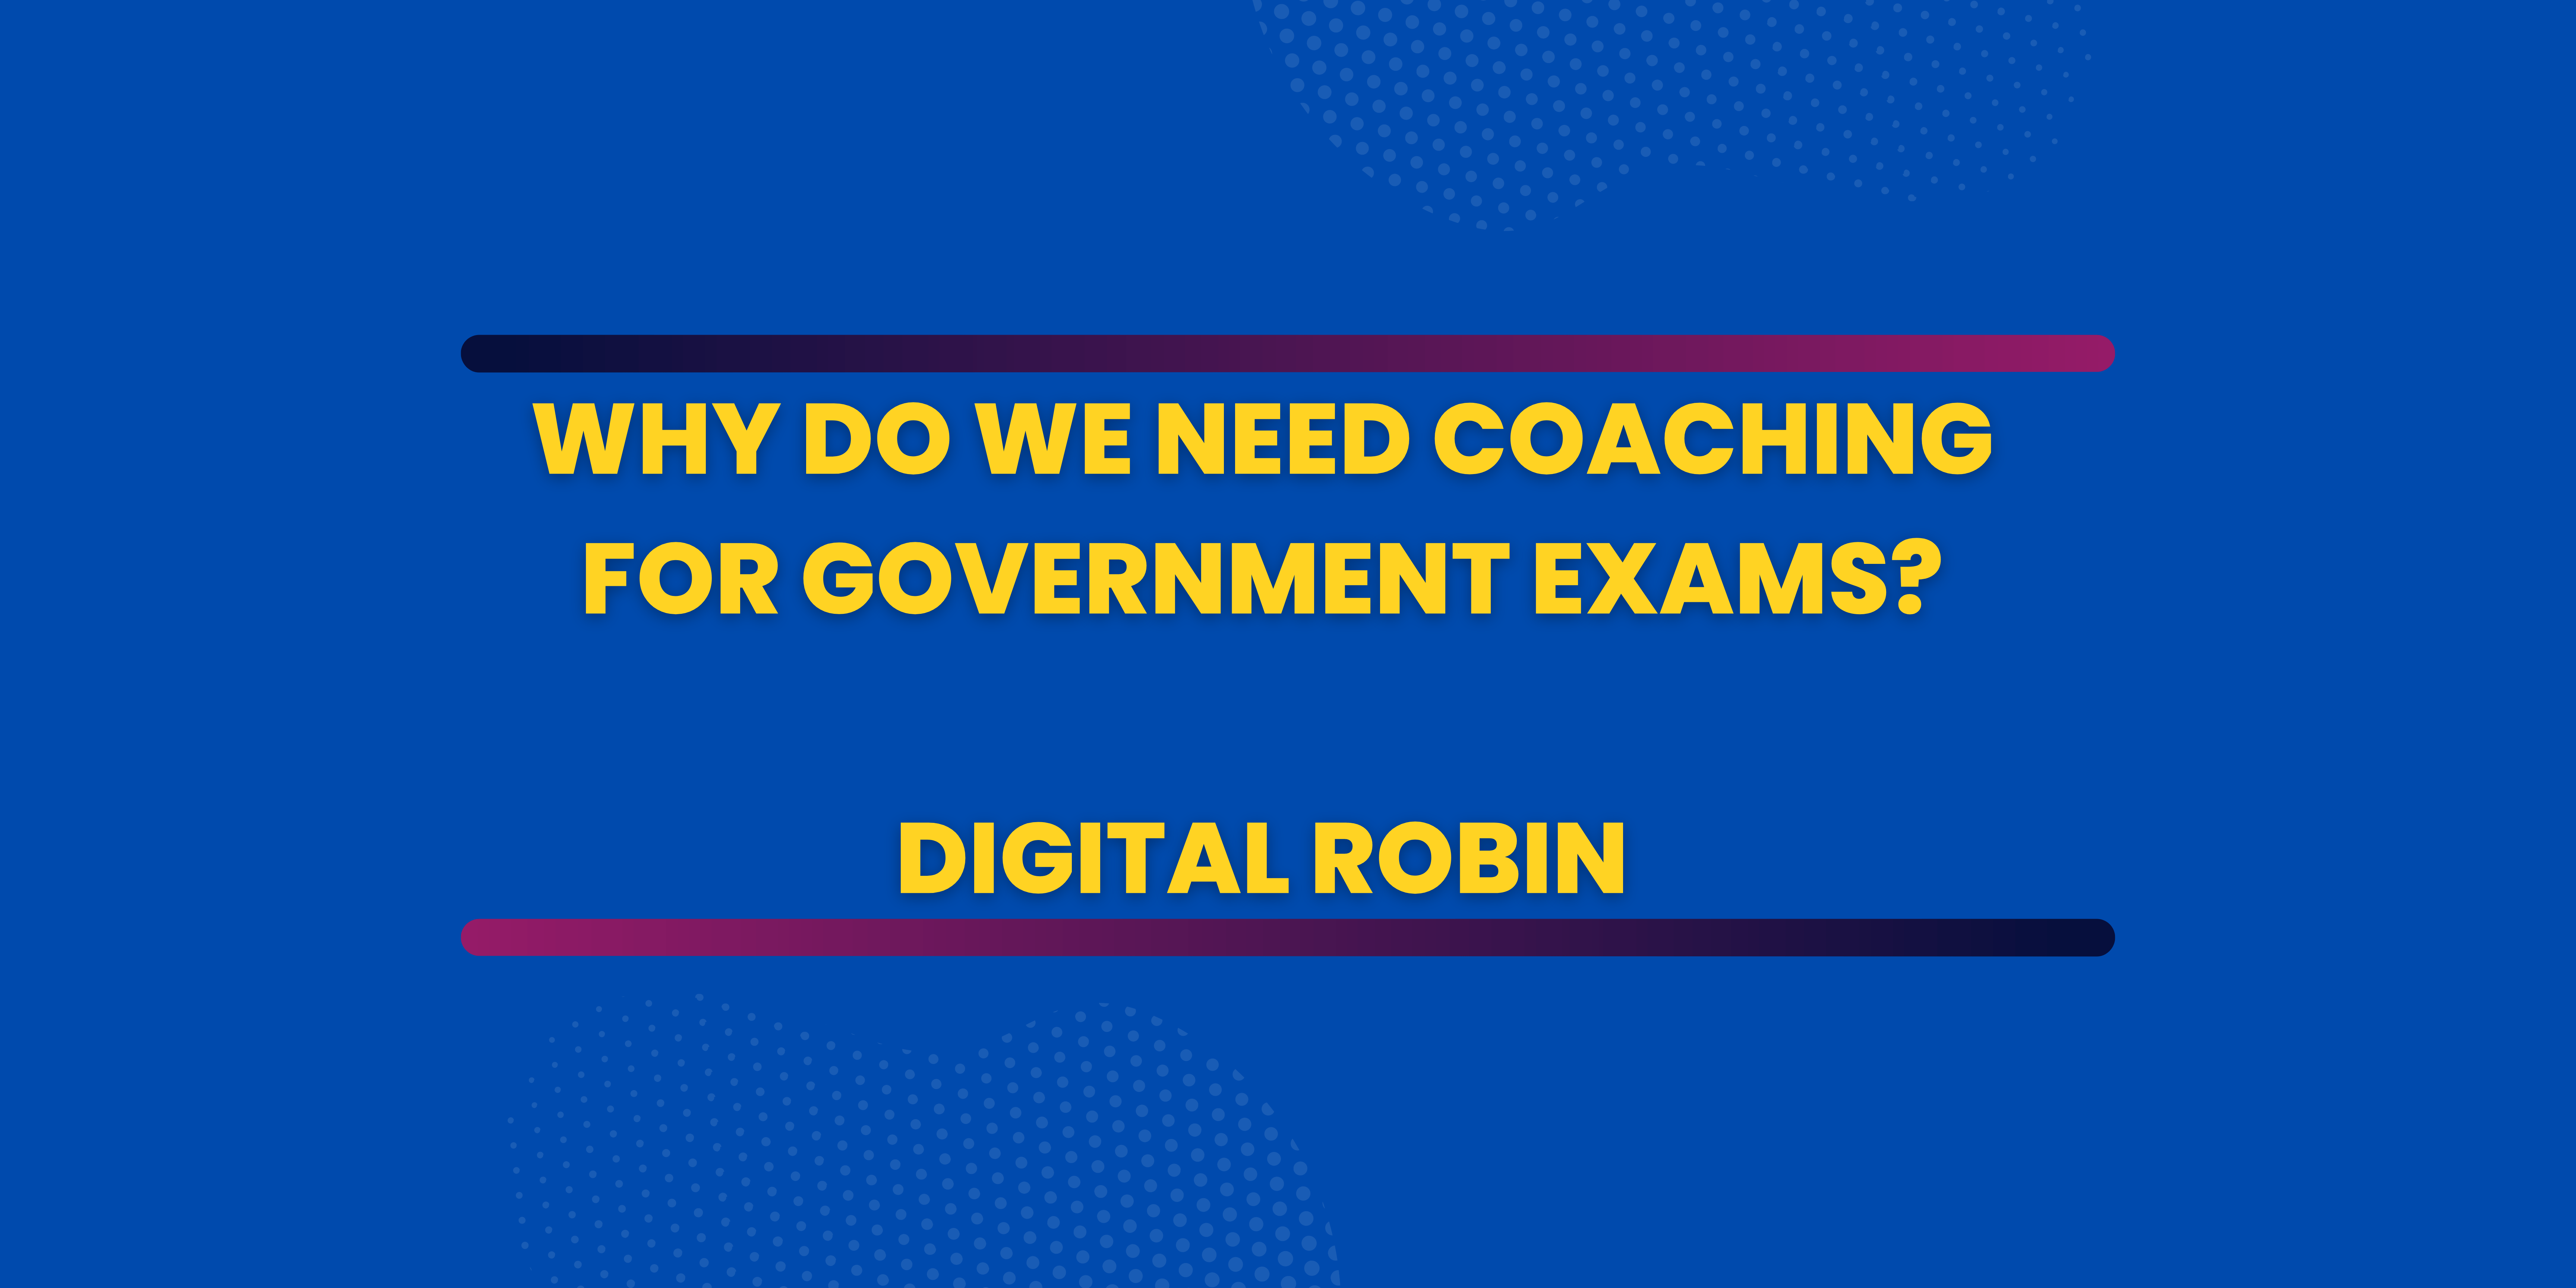 Why do we need coaching for government exams?